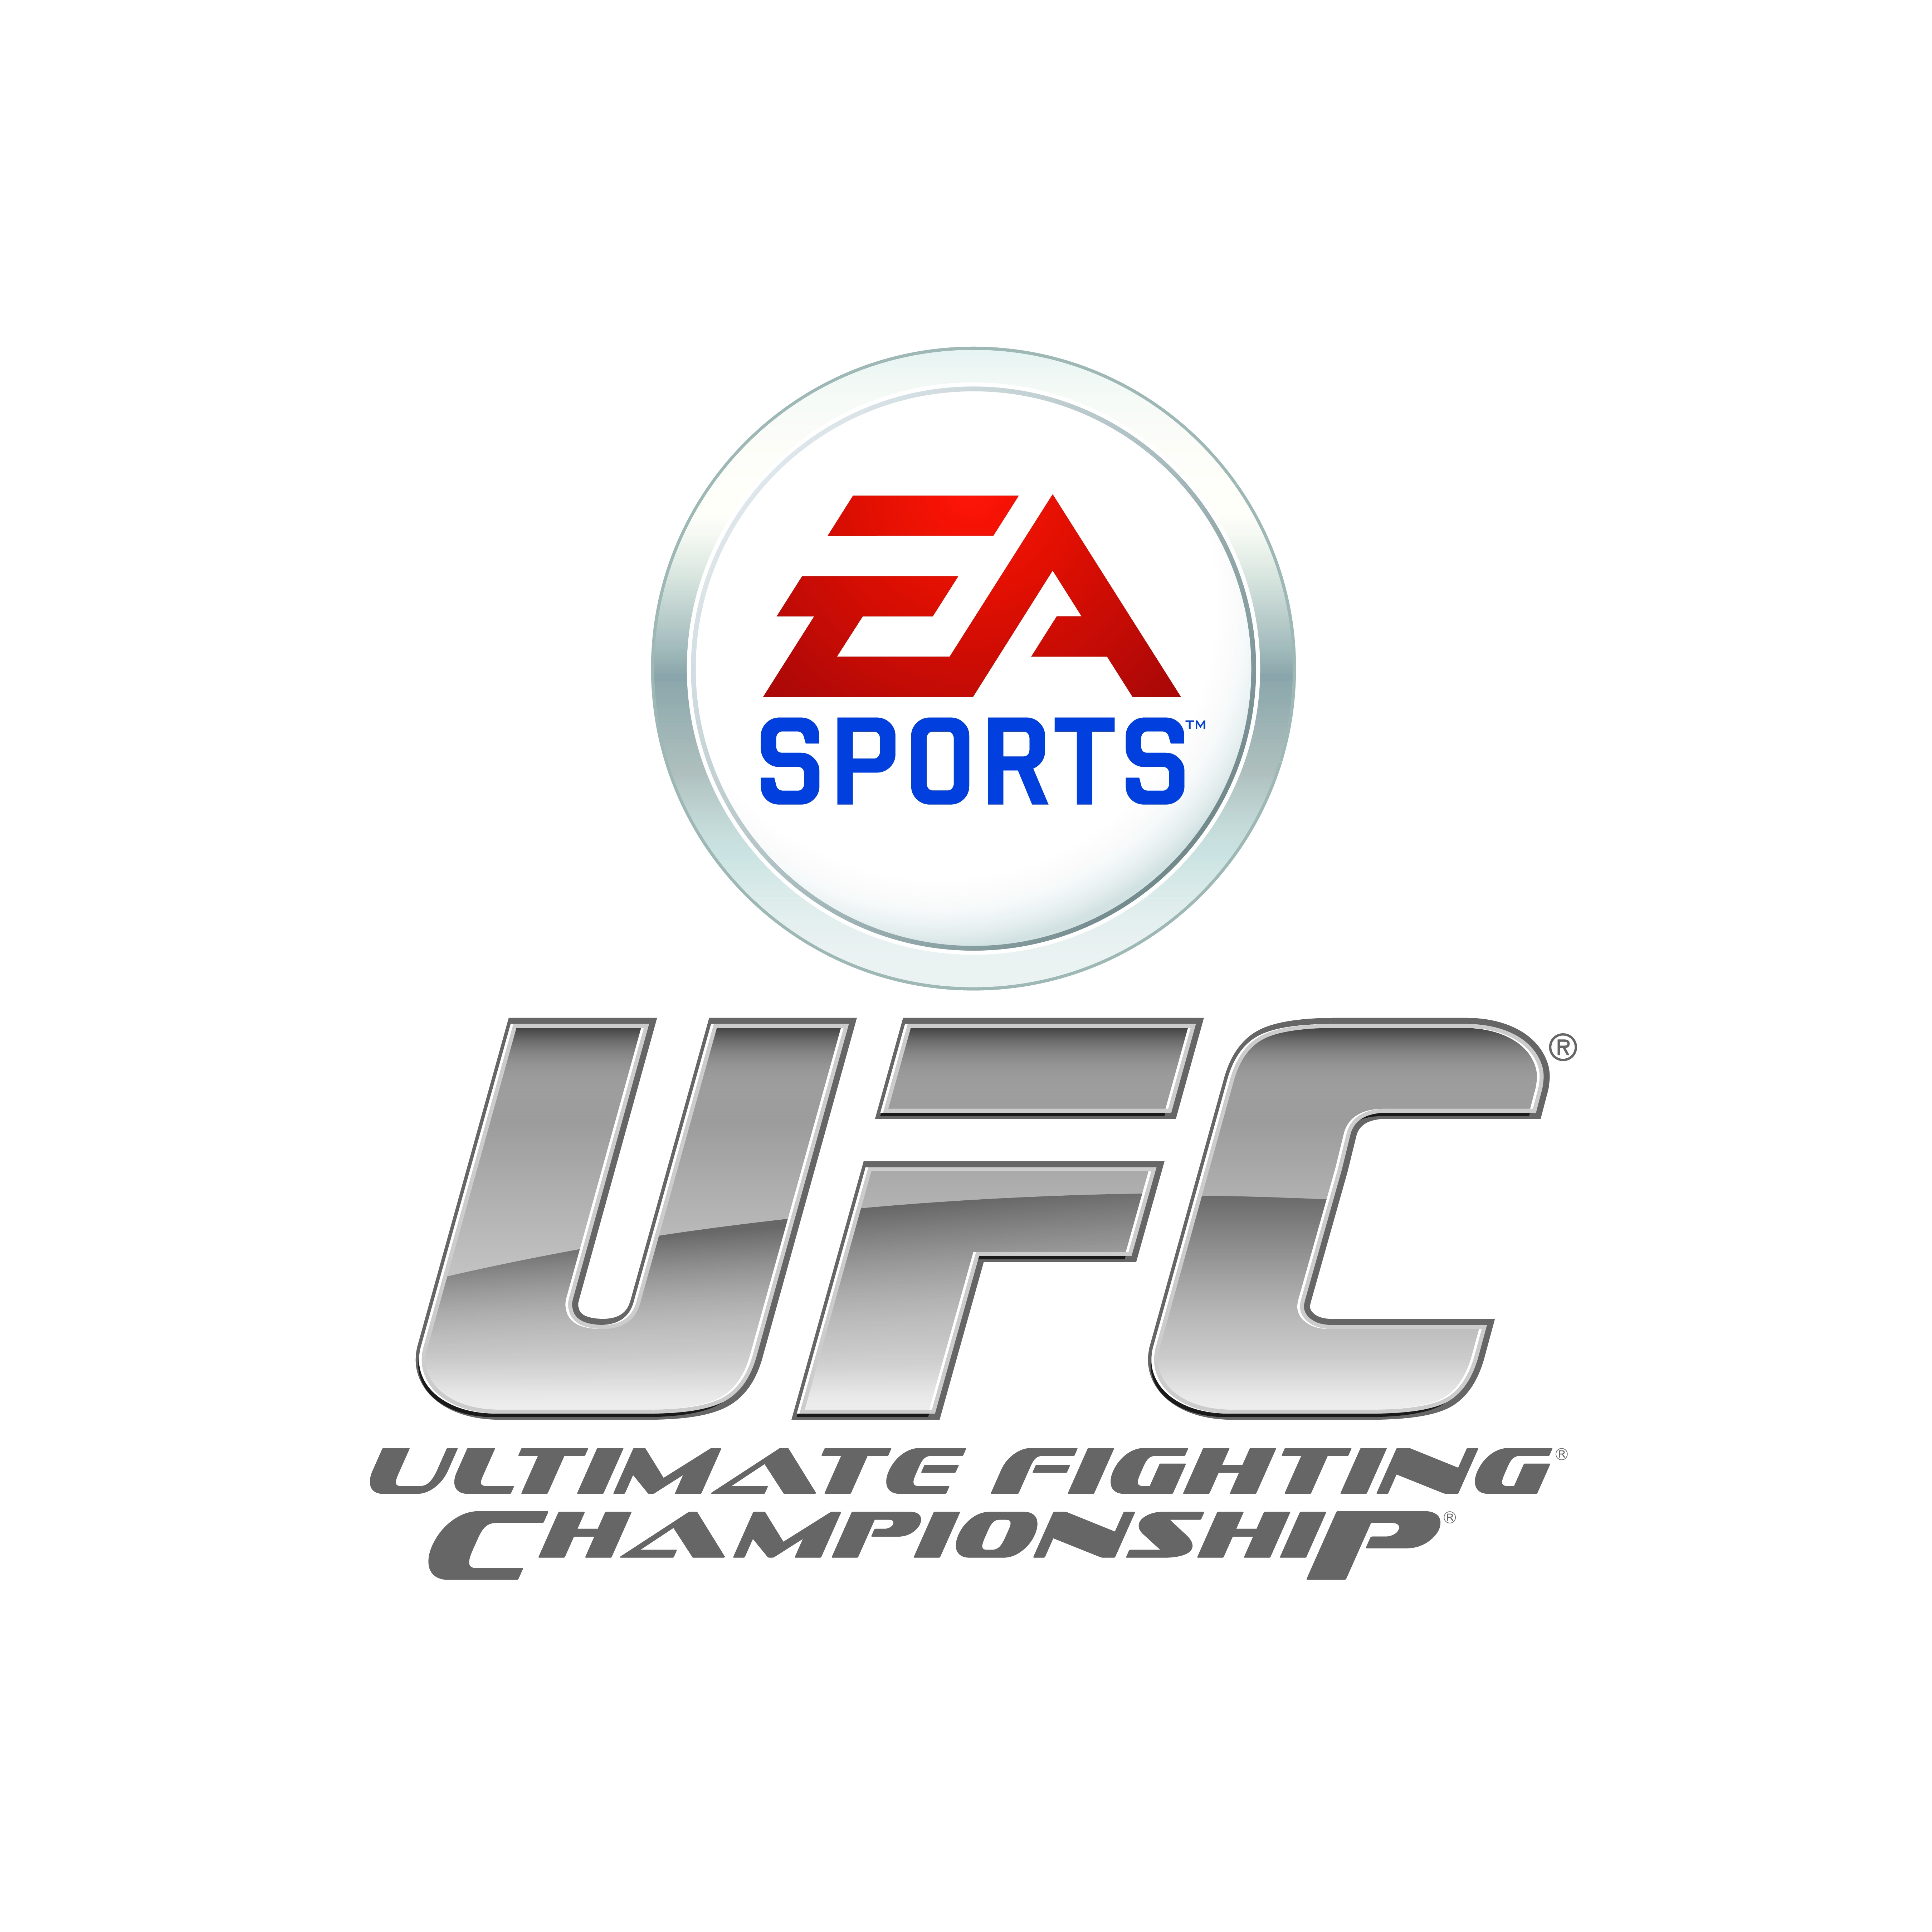 Ufc Logo : The UFC Logo and the History Behind the Company | LogoMyWay ...